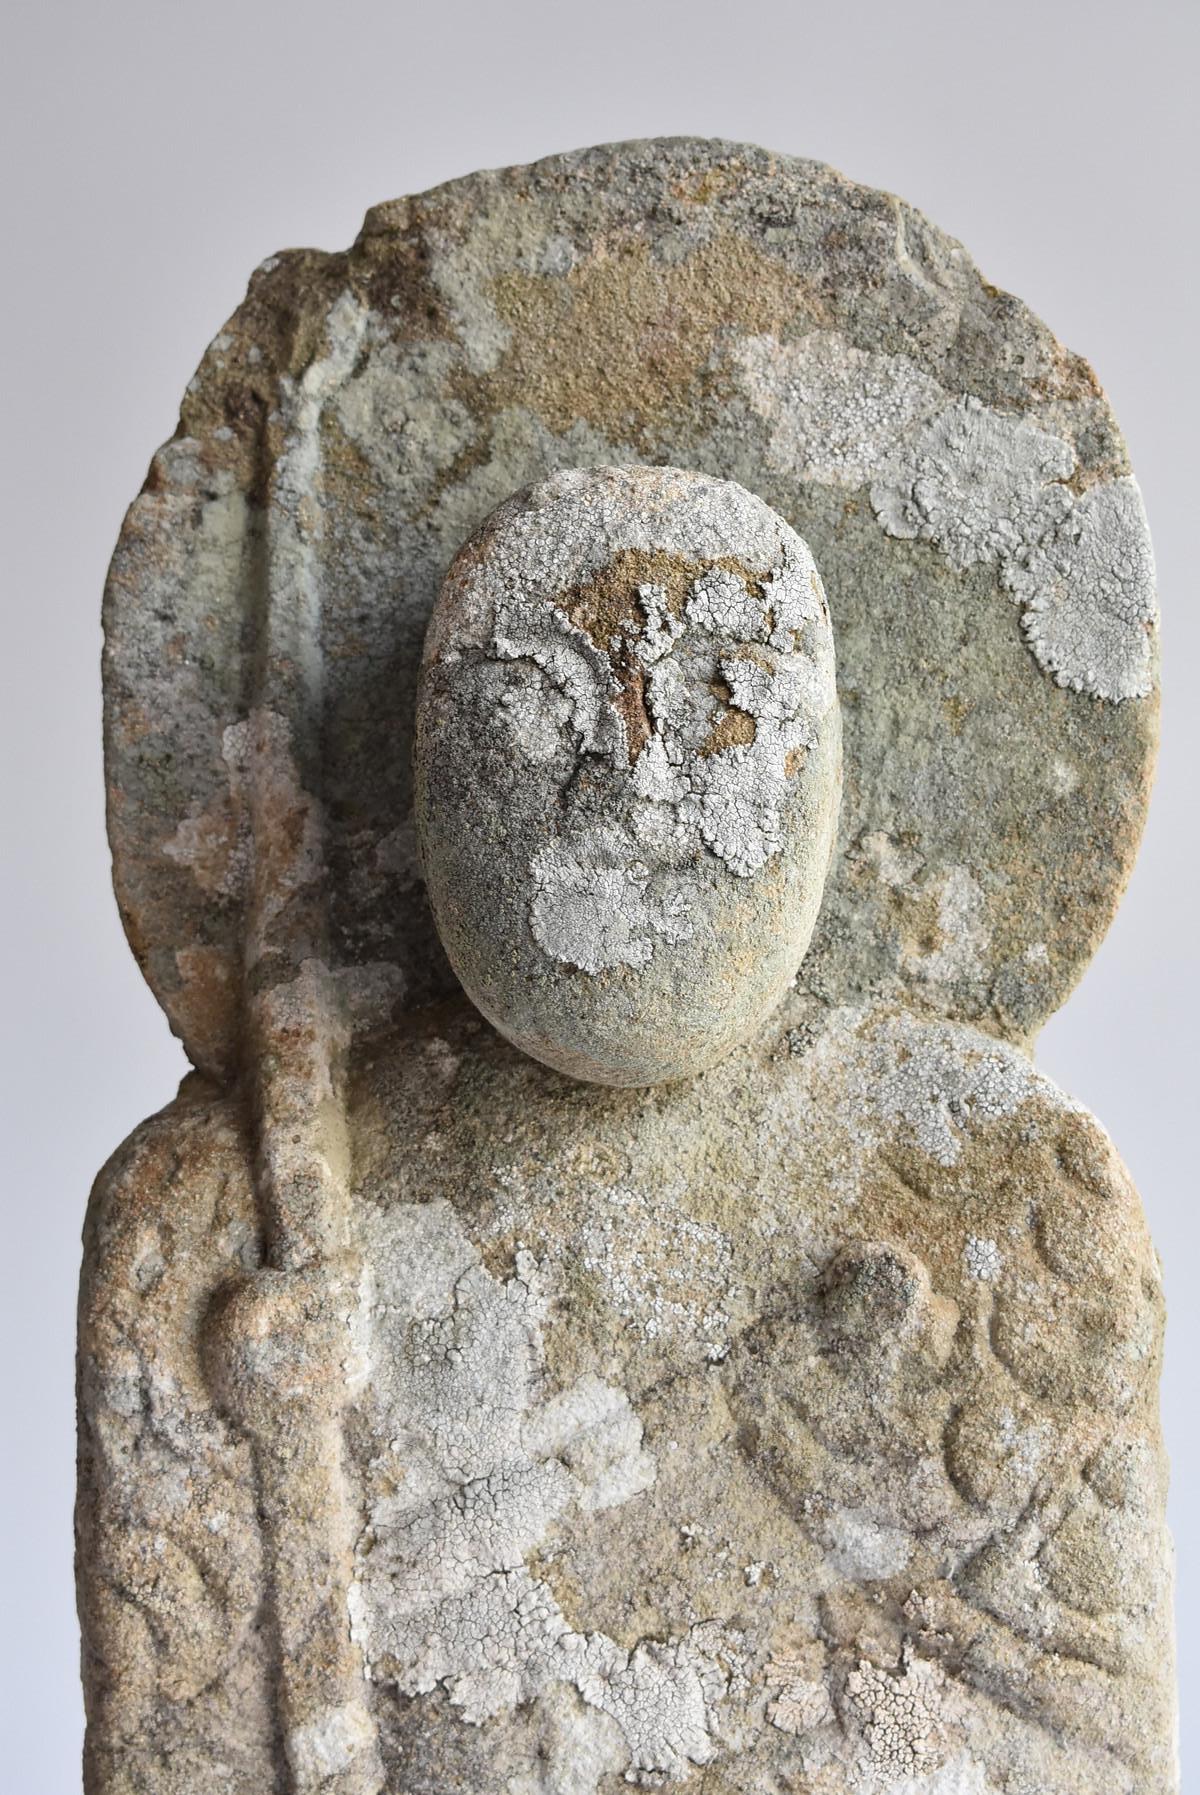 We Japanese introduce unique items with unique aesthetics, purchasing routes, and ways that no one can imitate.

It is an old Japanese stone Buddha.
The Buddha in the shape of a monk is called Jizo Bodhisattva.
Jizo is one of the bodhisattvas in